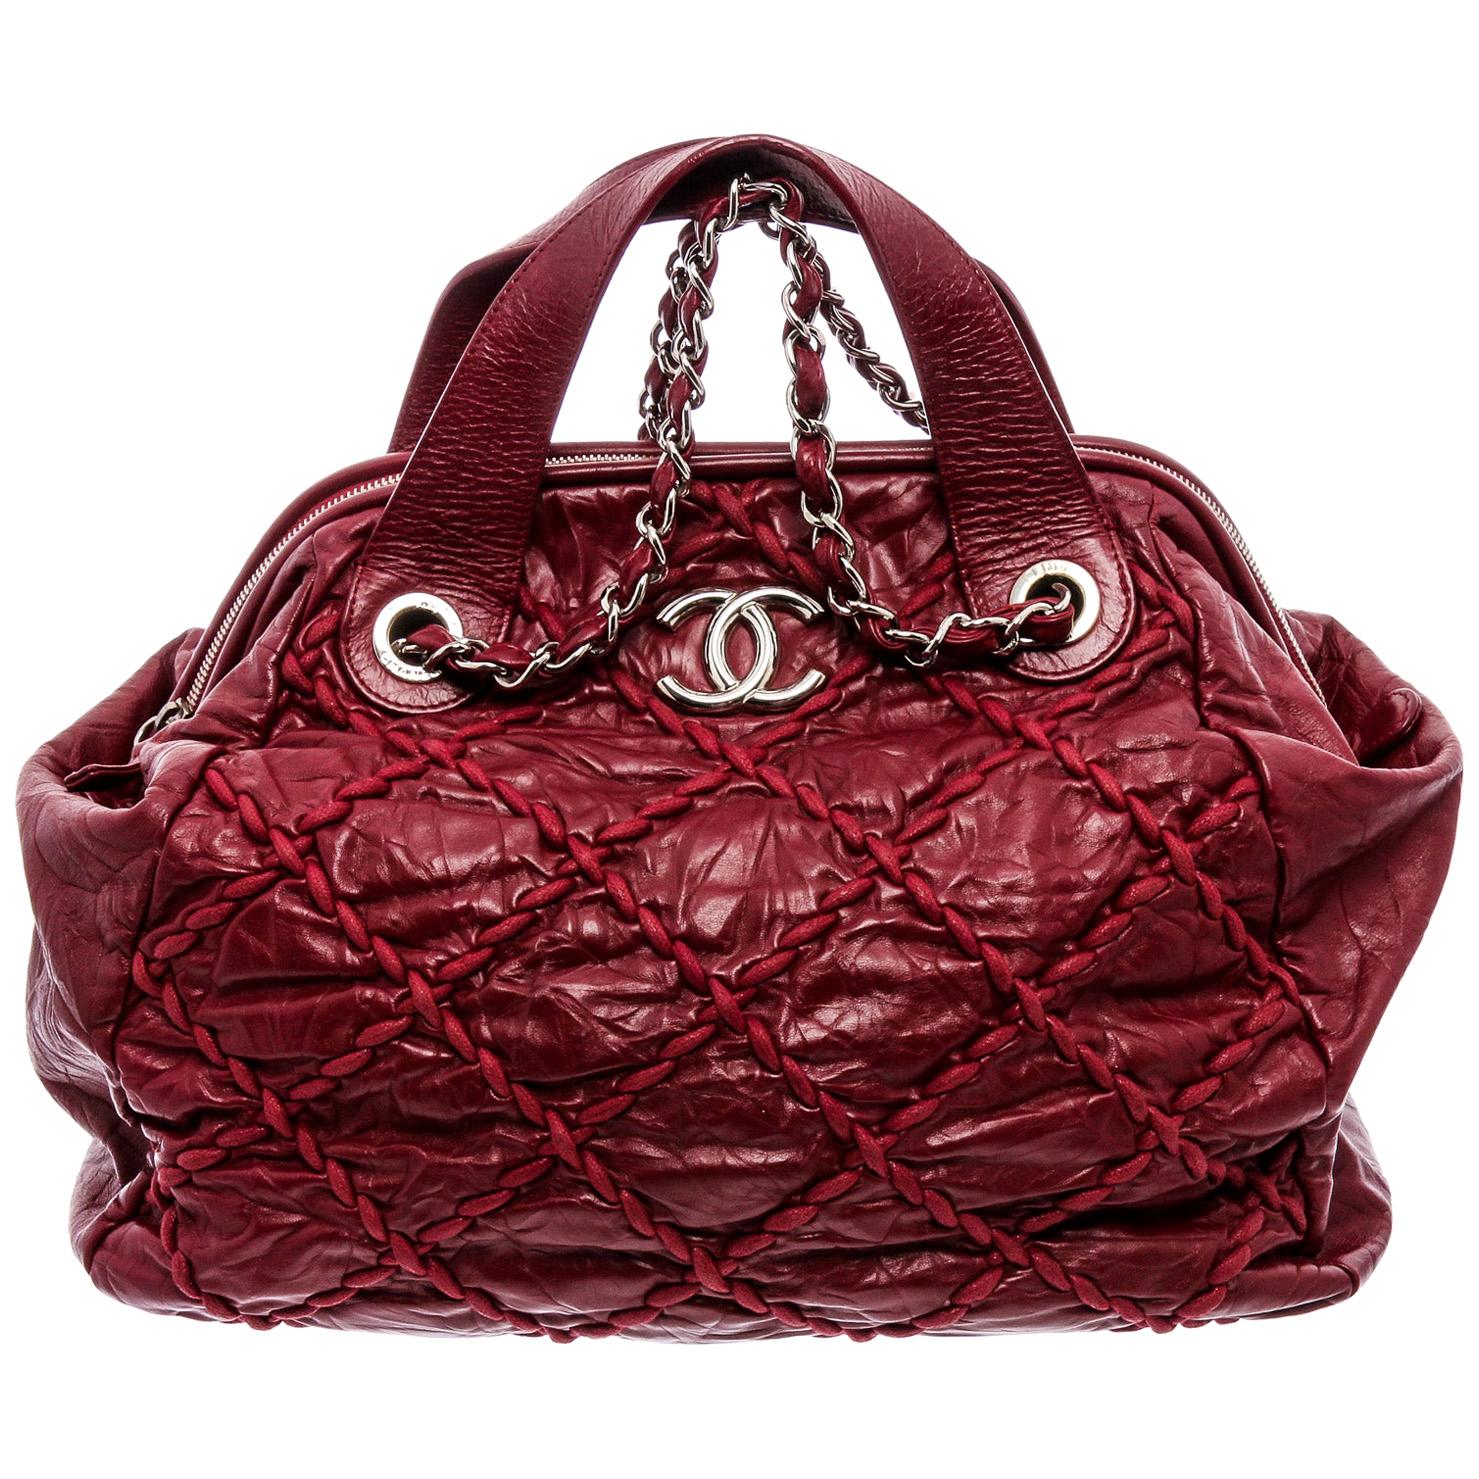 Chanel Red Distressed Leather Ultra Stitch Bowler Bag